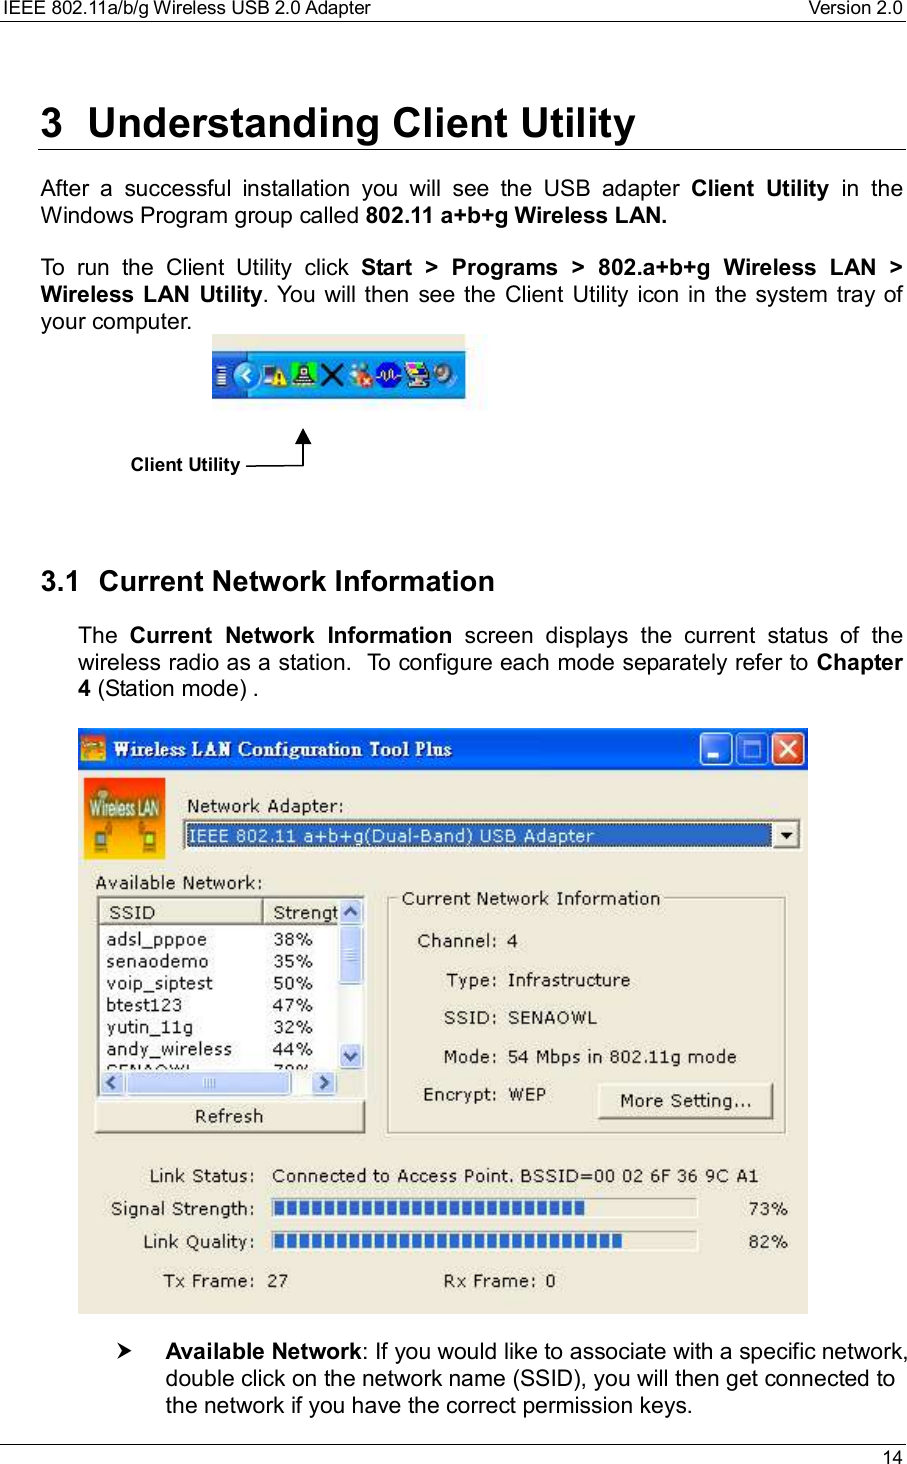 IEEE 802.11a/b/g Wireless USB 2.0 Adapter Version 2.0 143 Understanding Client UtilityAfter a successful installation you will see the USB adapter  Client Utility  in theWindows Program group called 802.11 a+b+g Wireless LAN.To run the Client Utility click  Start &gt; Programs &gt; 802.a+b+g Wireless LAN &gt;Wireless LAN Utility. You will then see the Client Utility icon in the system tray ofyour computer.                           3.1 Current Network InformationThe  Current Network Information screen displays the current status of thewireless radio as a station.  To configure each mode separately refer to Chapter4 (Station mode) .† Available Network: If you would like to associate with a specific network,double click on the network name (SSID), you will then get connected tothe network if you have the correct permission keys.Client Utility